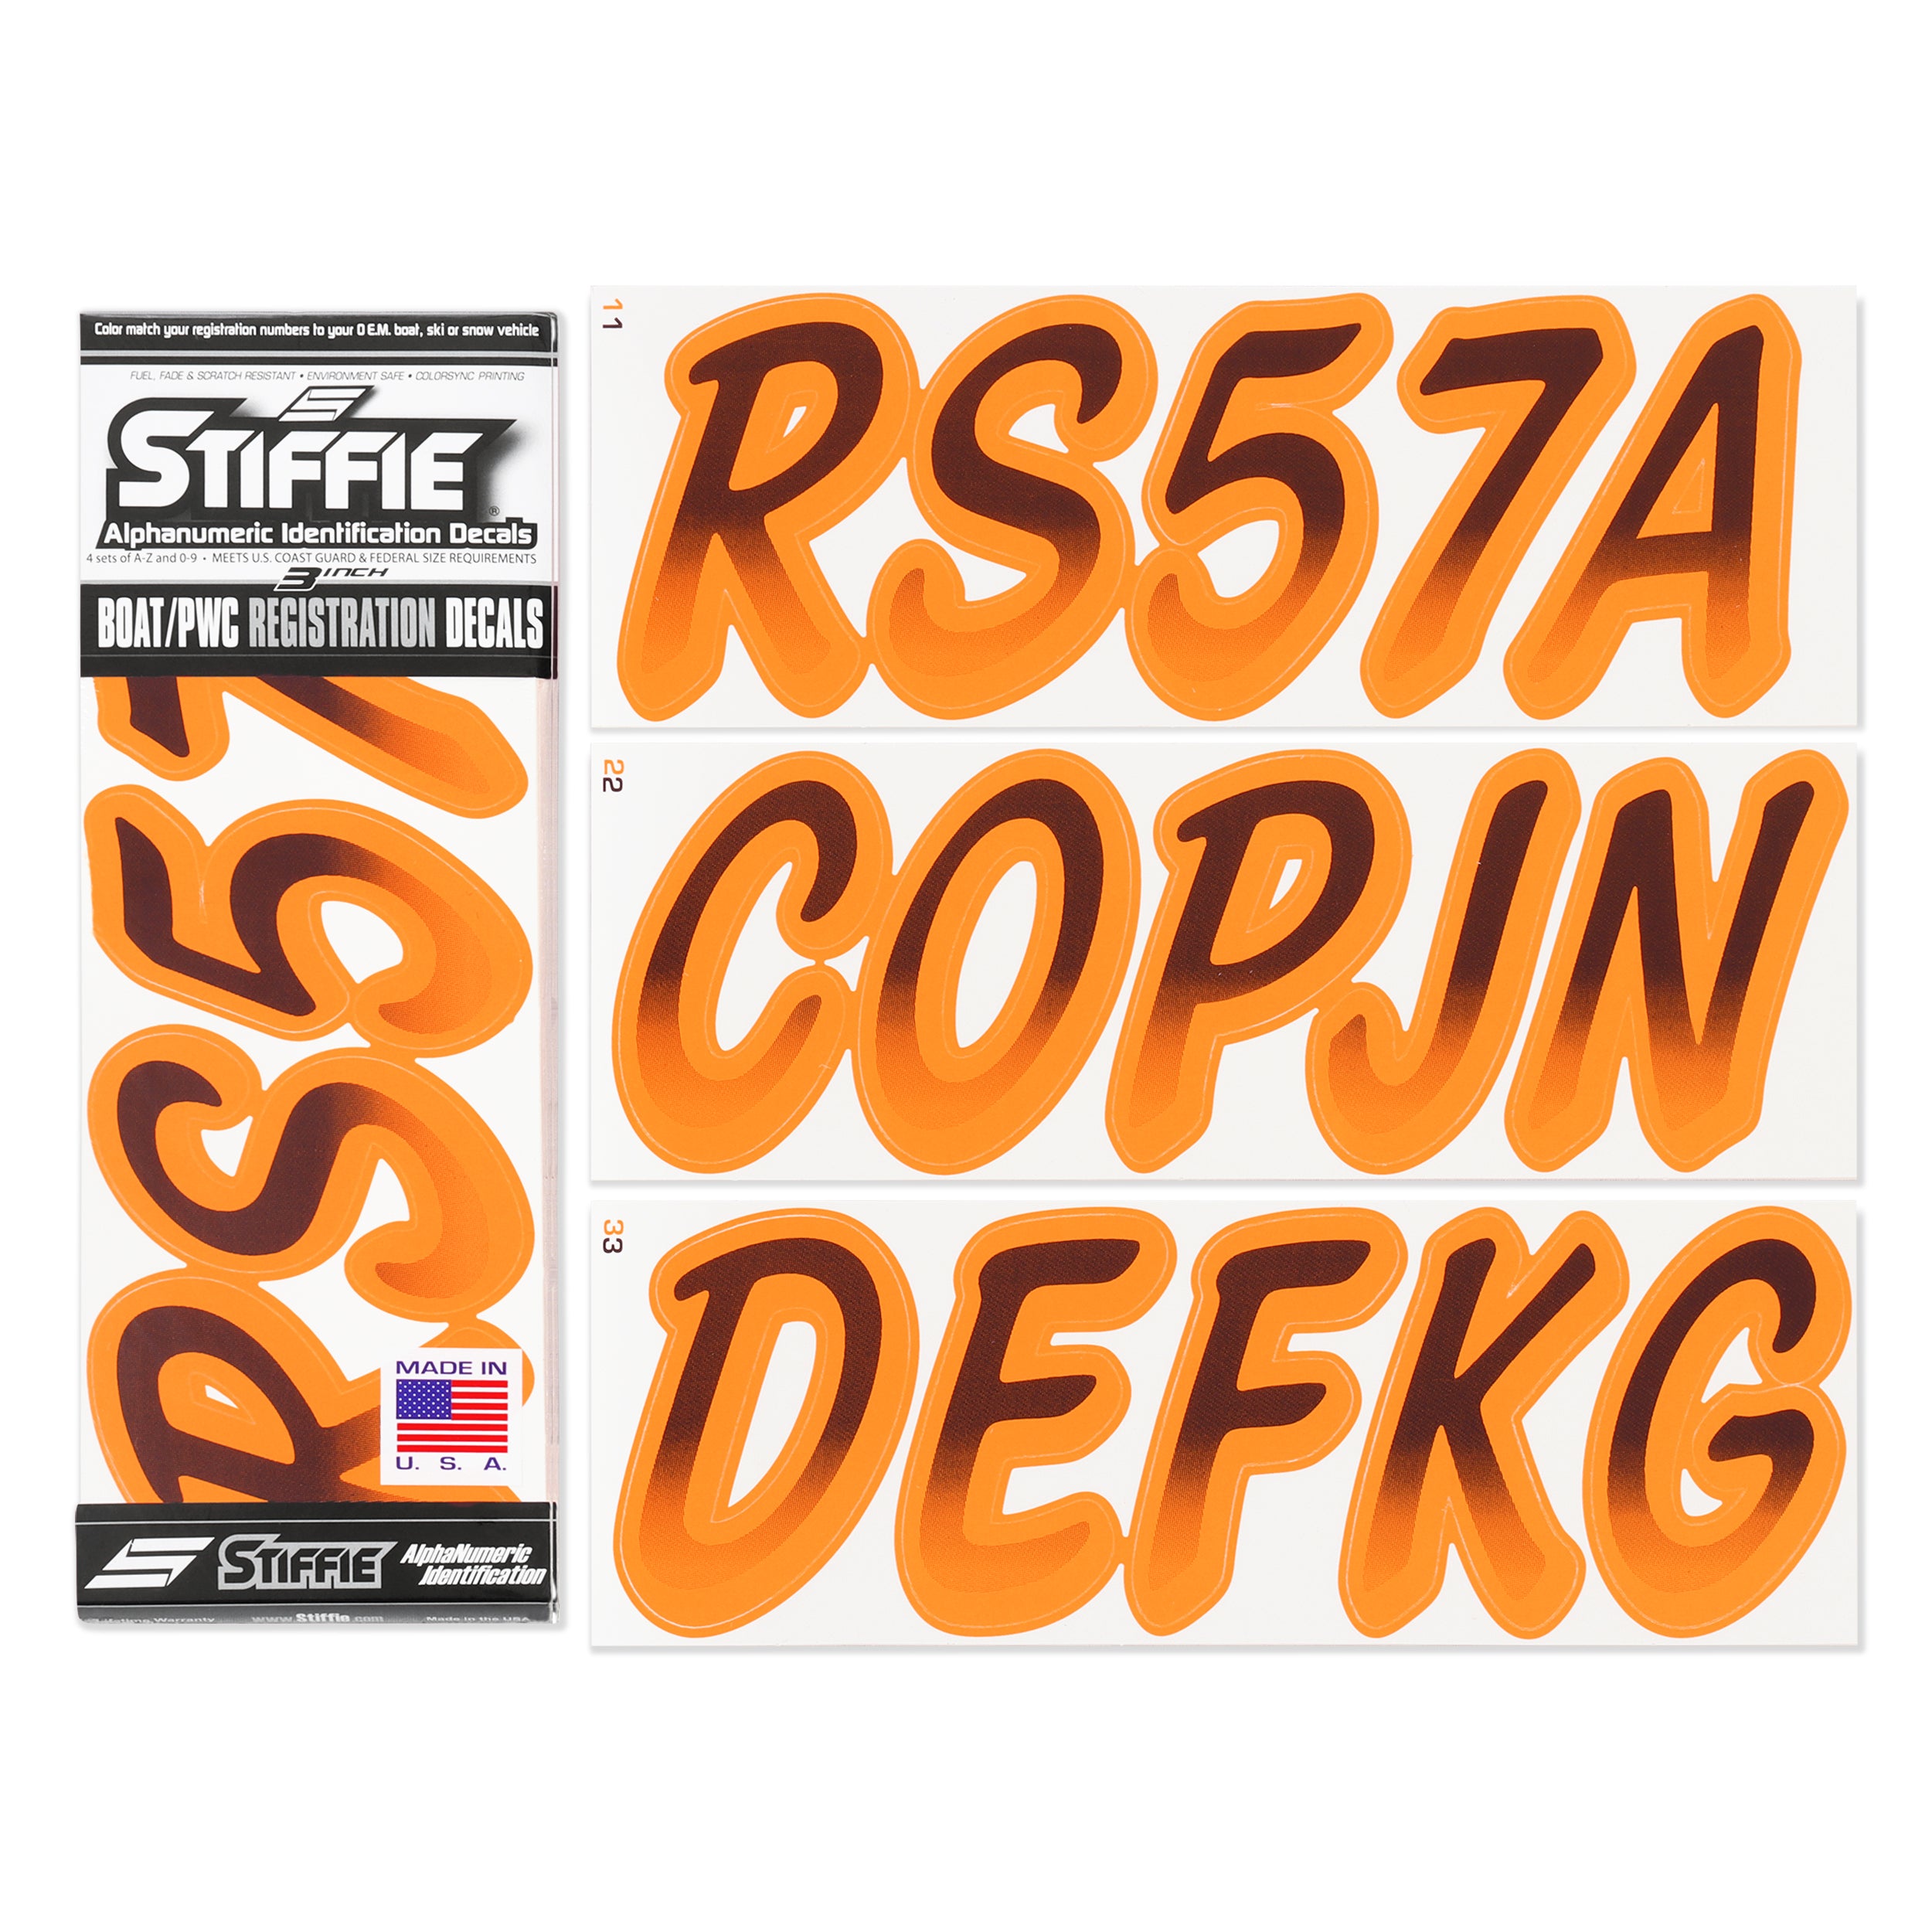 Stiffie Whipline Black/Orange Crush Super Sticky 3" Alpha Numeric Registration Identification Numbers Stickers Decals for Sea-Doo Spark, Inflatable Boats, Ribs, Hypalon/PVC, PWC and Boats.